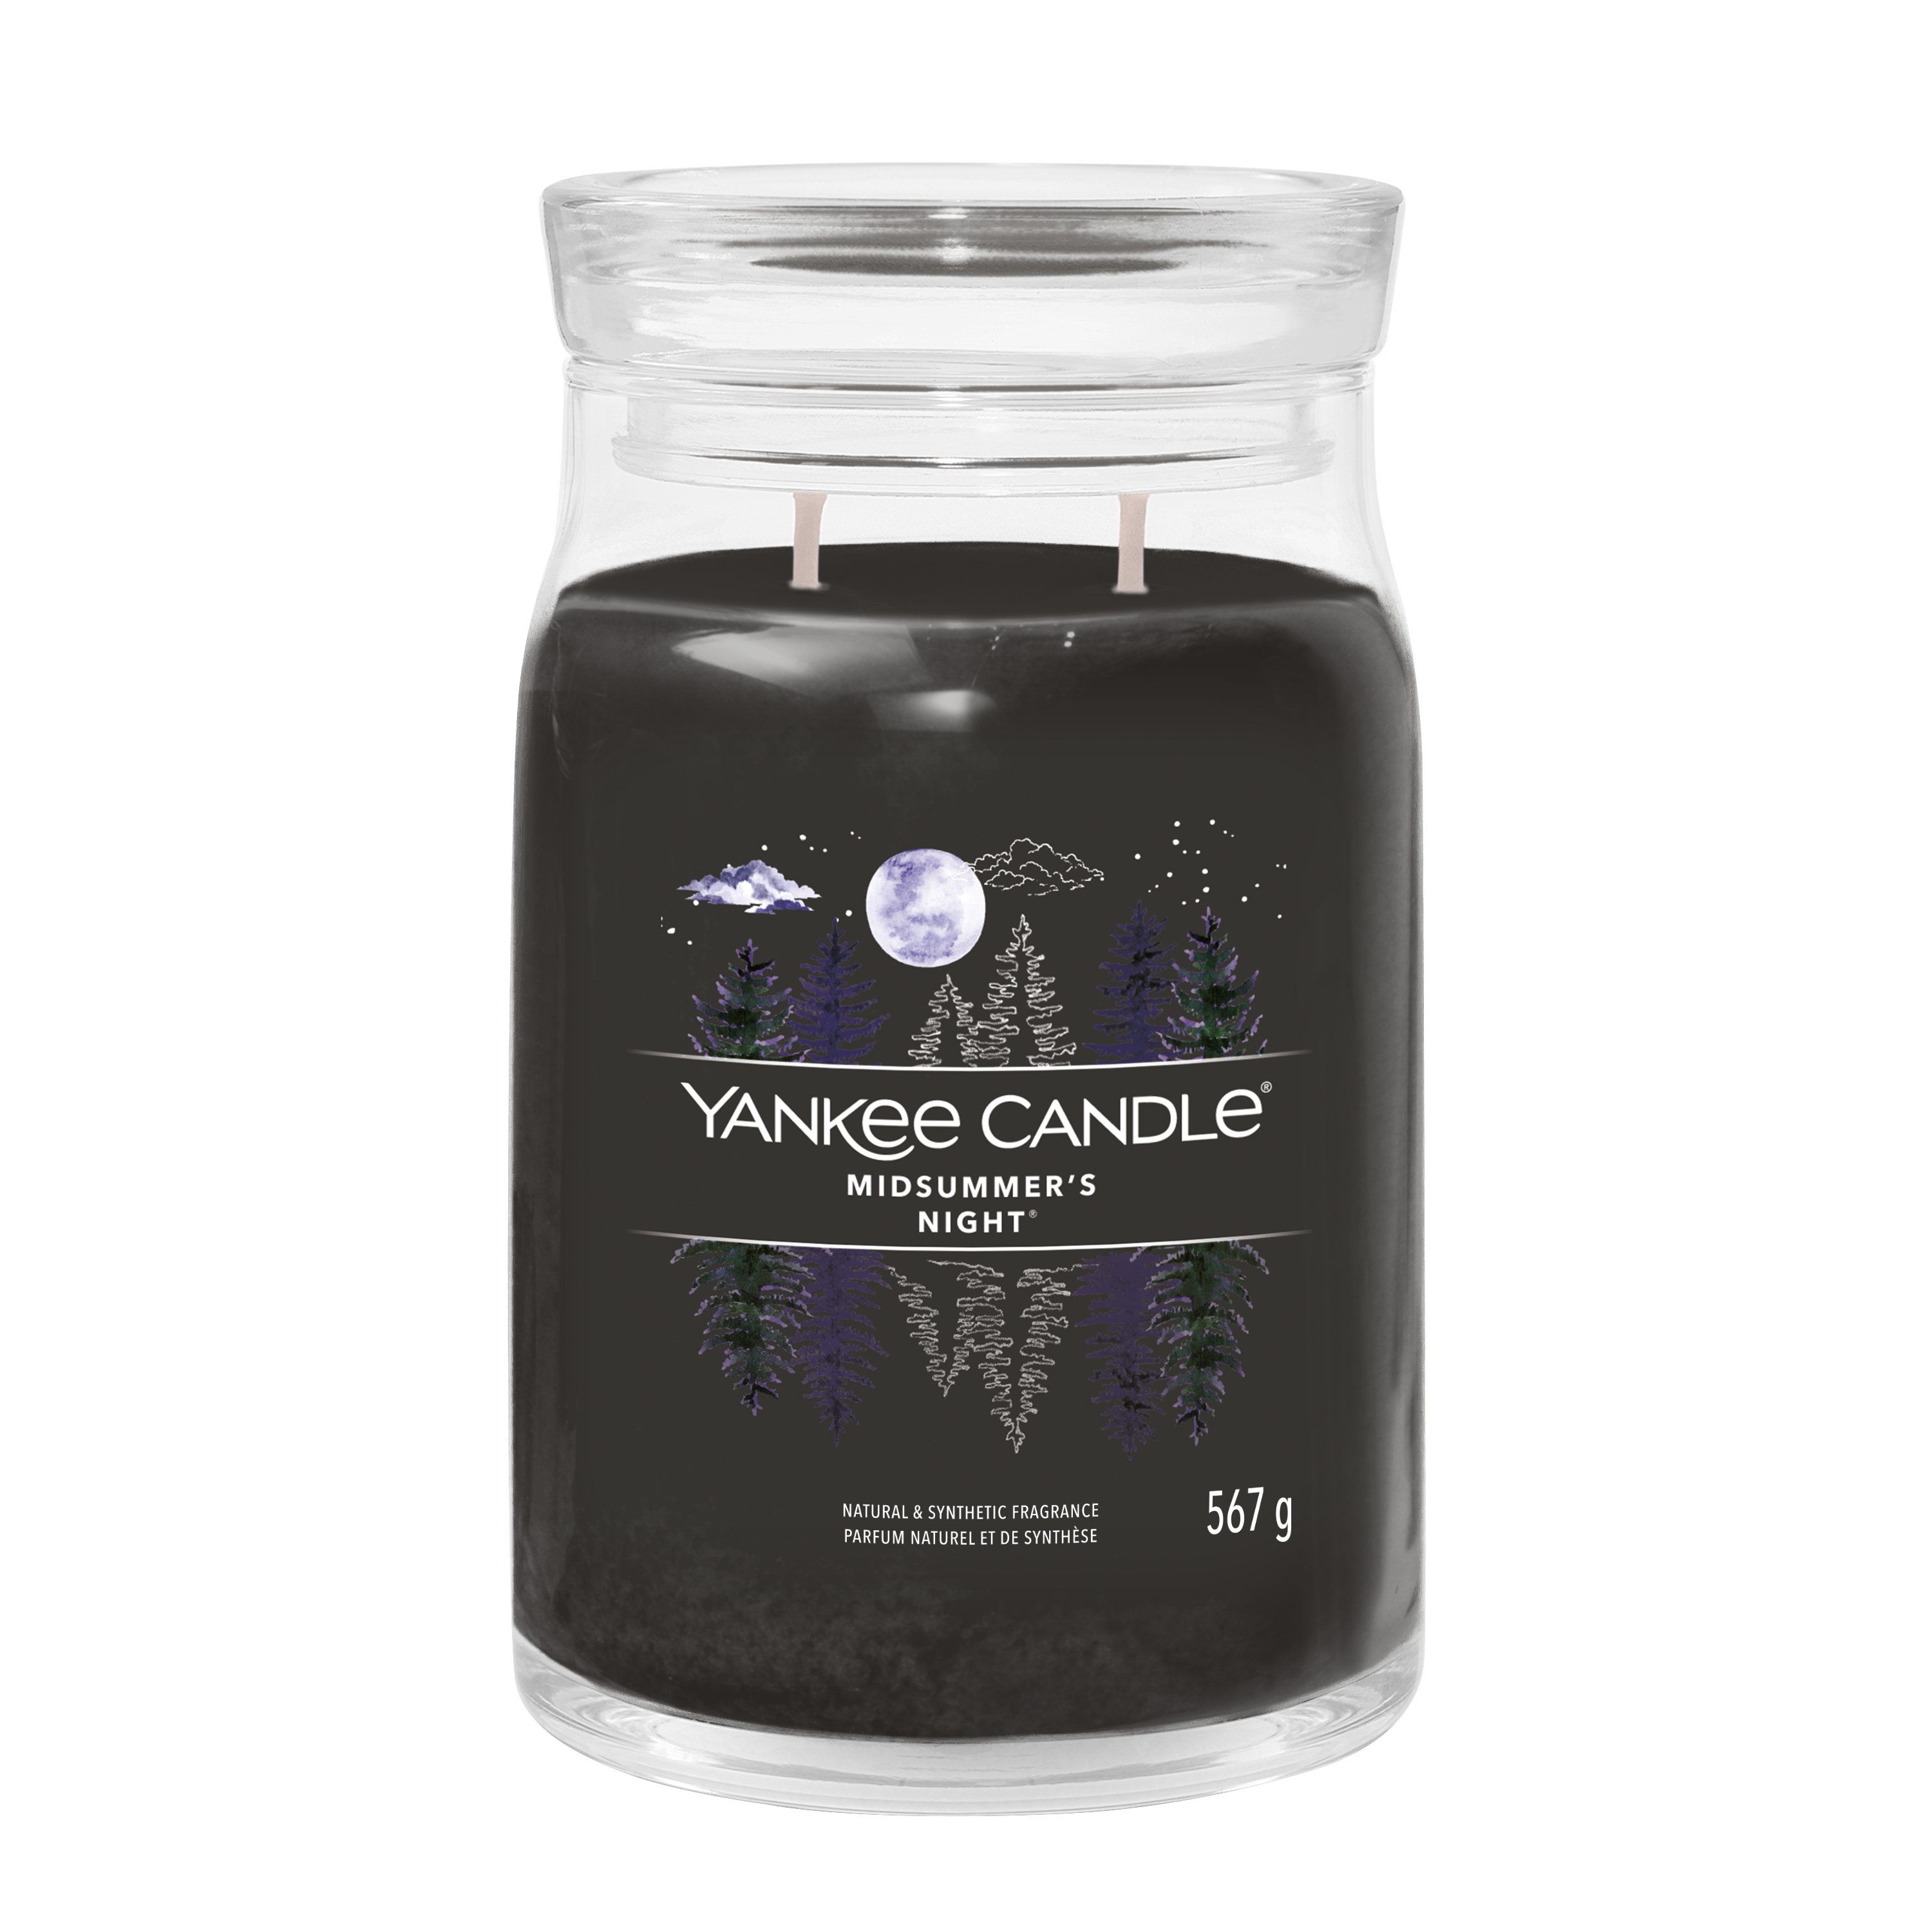 Yankee Candle Midsummer's Night - Large 2 Wick Tumbler Candle 